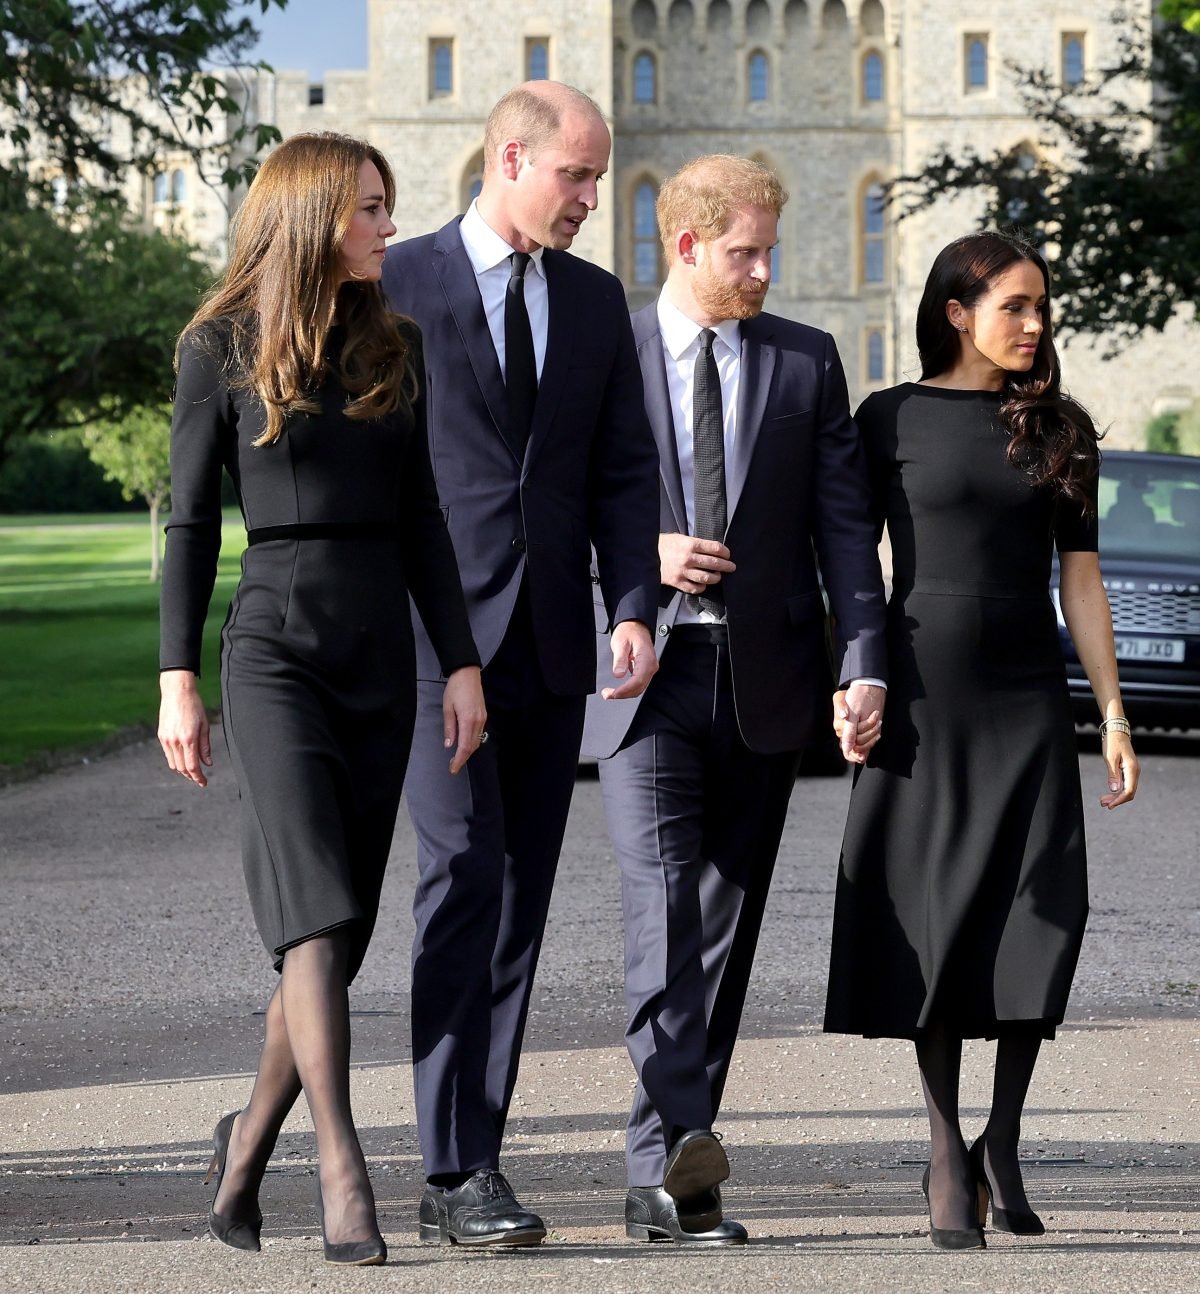 Kate Middleton, Prince William, Prince Harry, and Meghan Markle arrive on the long Walk at Windsor Castle to view flowers and tributes for Queen Elizabeth